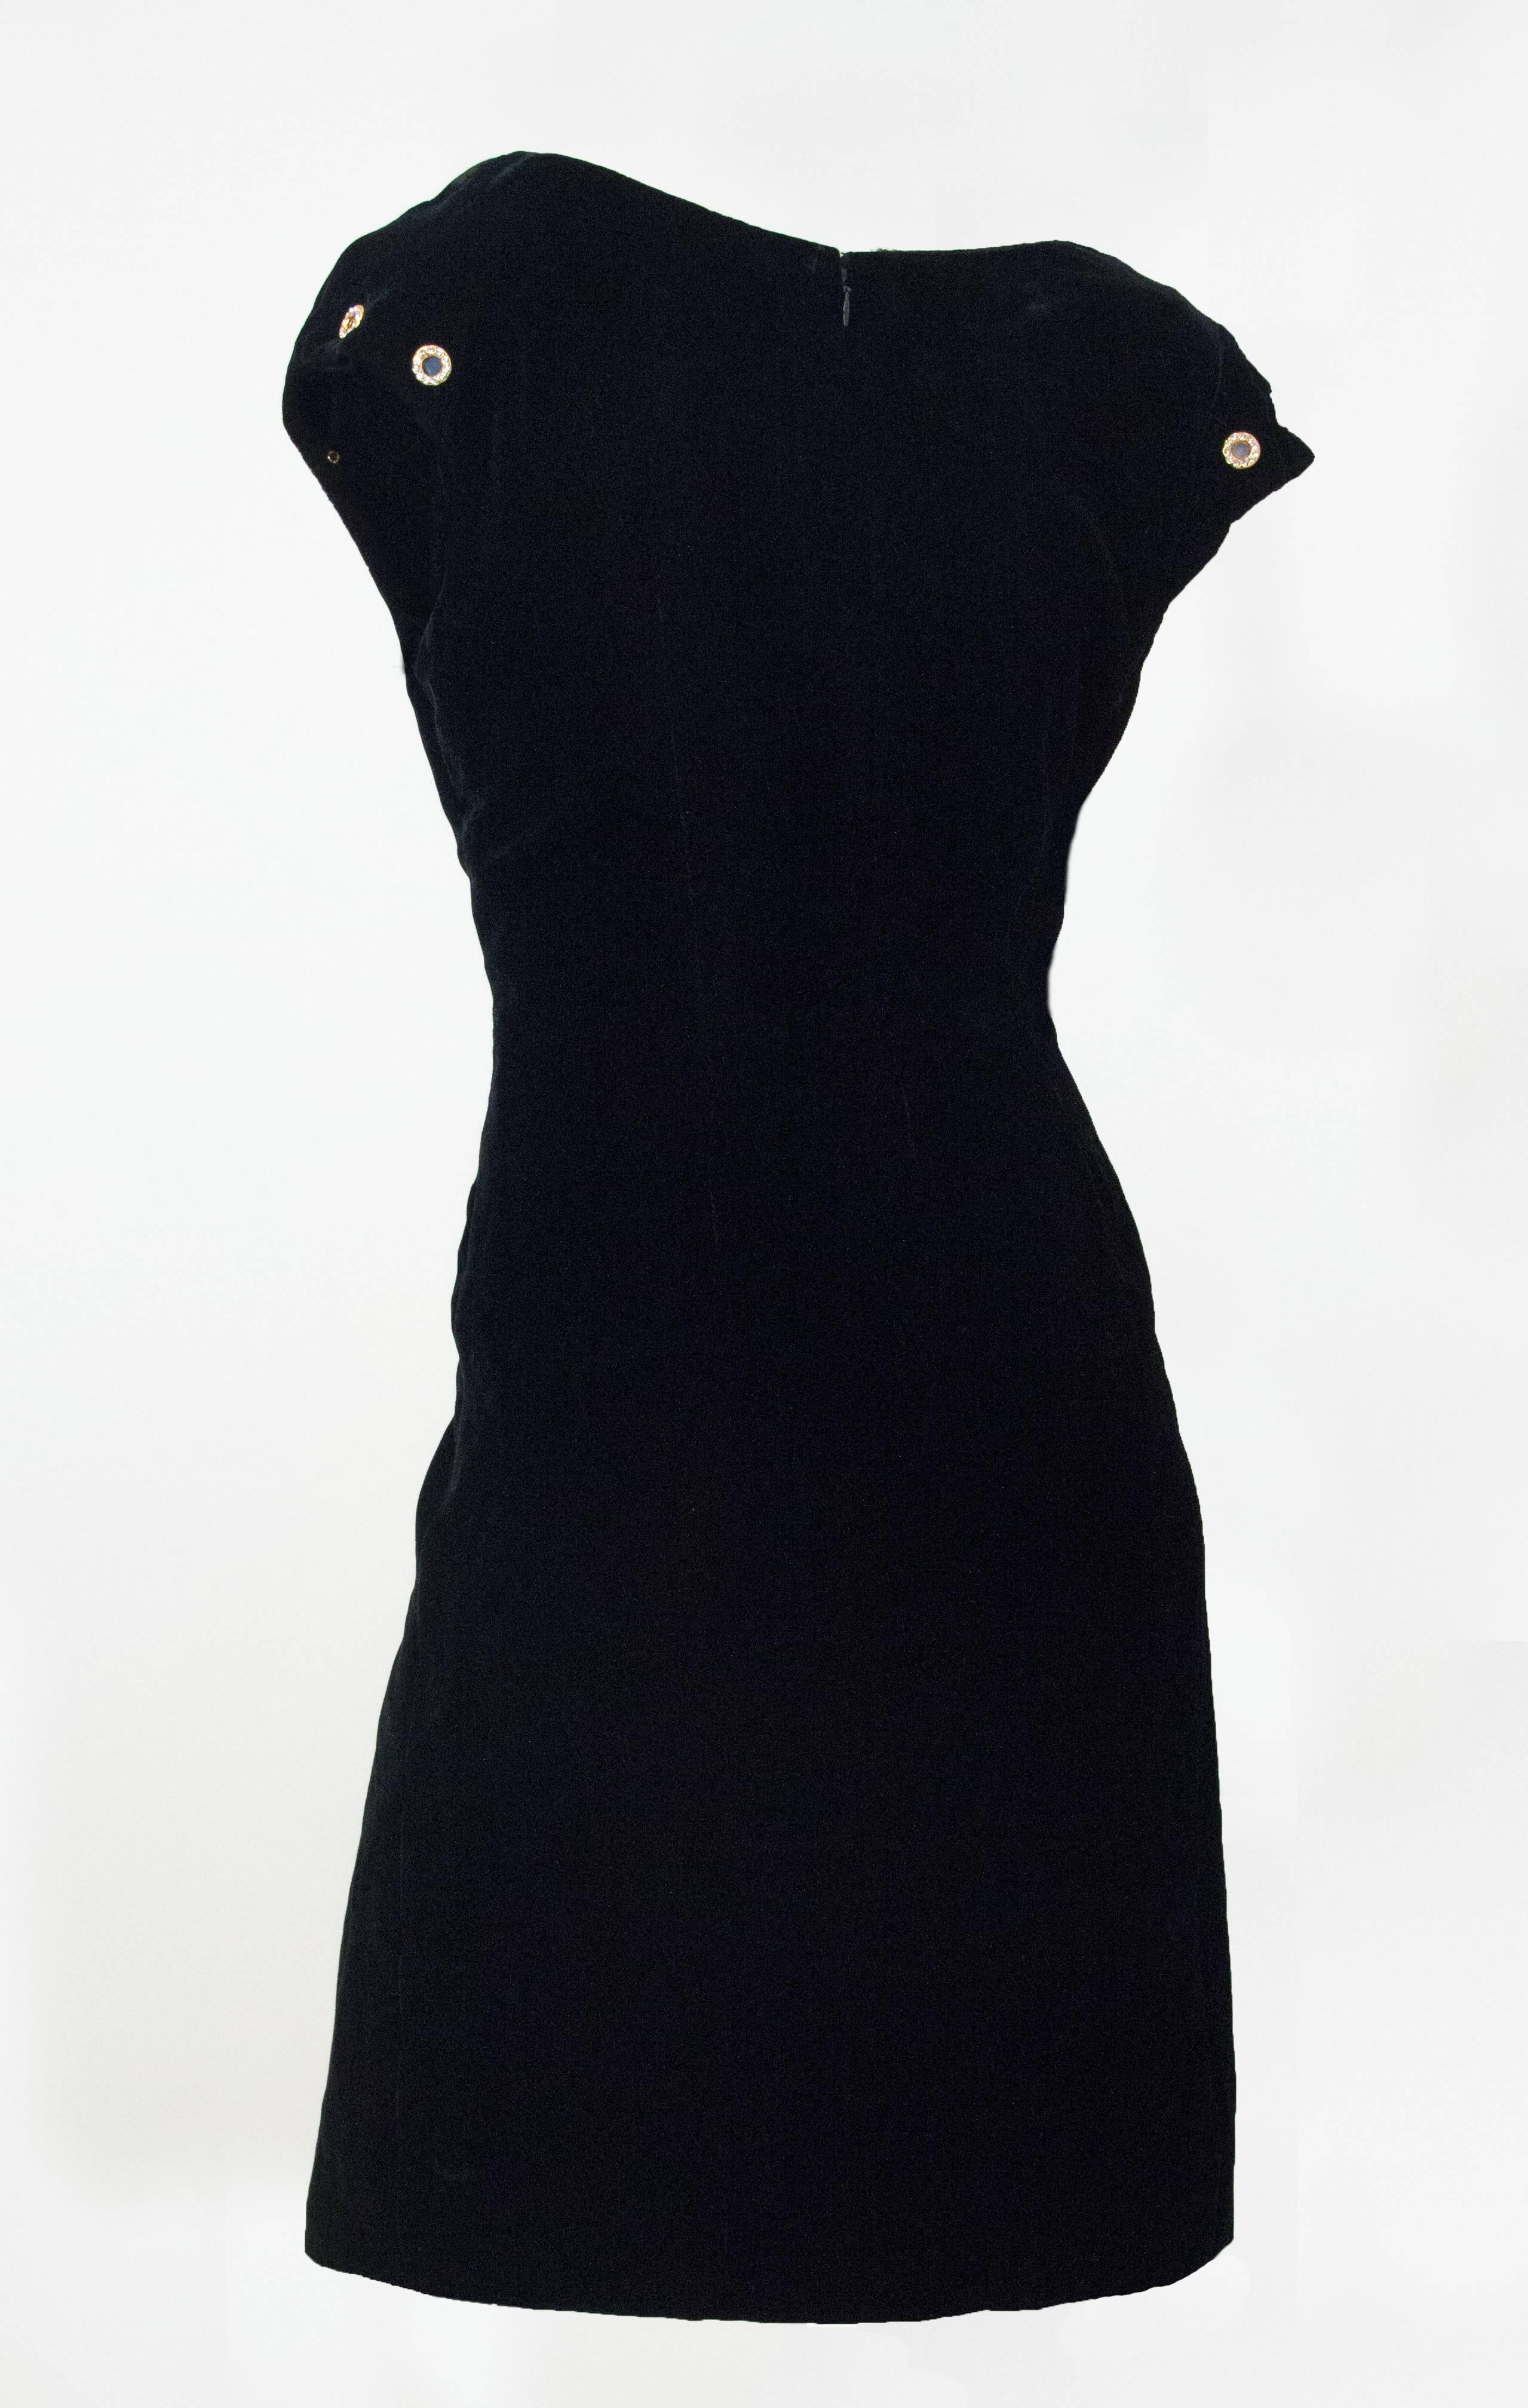 90s Christian Lacroix velvet sheath dress. Gold tone rhinestone encrusted grommets on cap sleeves. One inset pocket on left front. Fully lined. Zips up the back. 